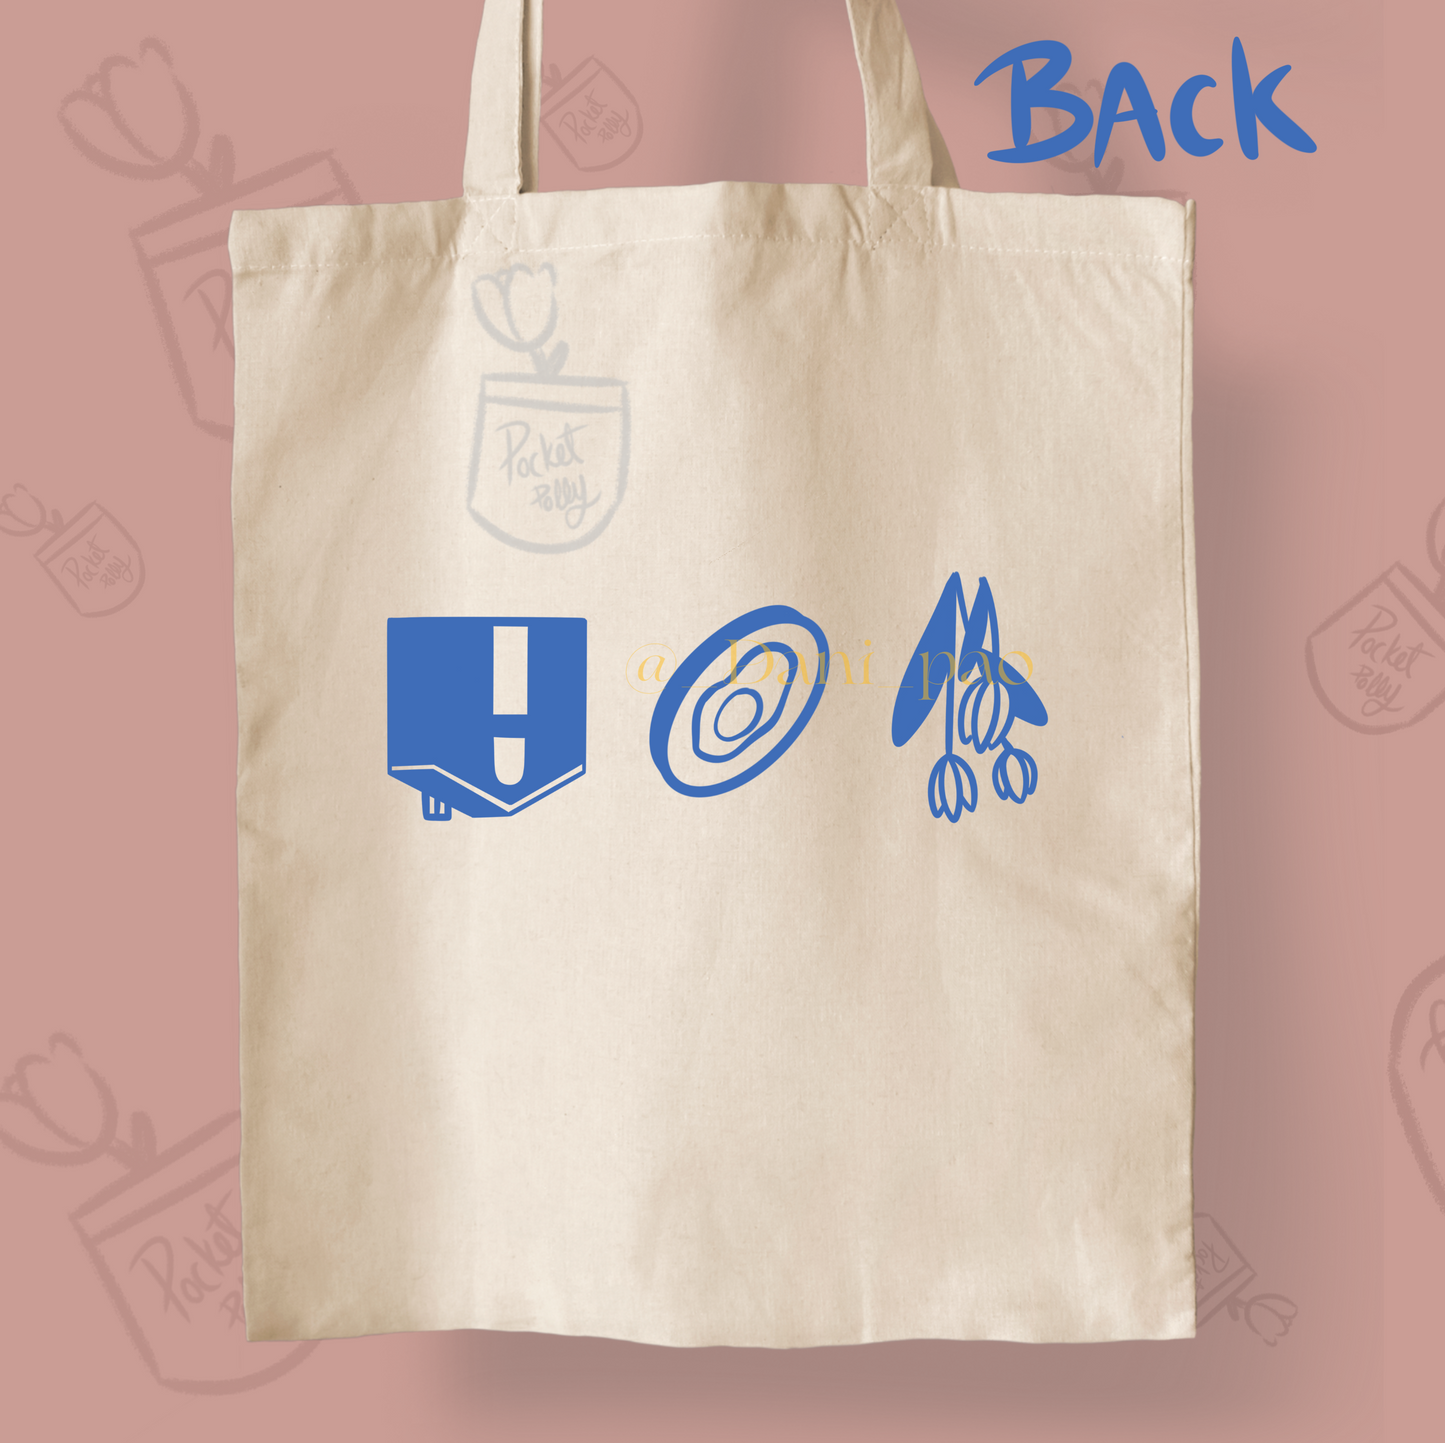 Welcome to harry's house Tote bag